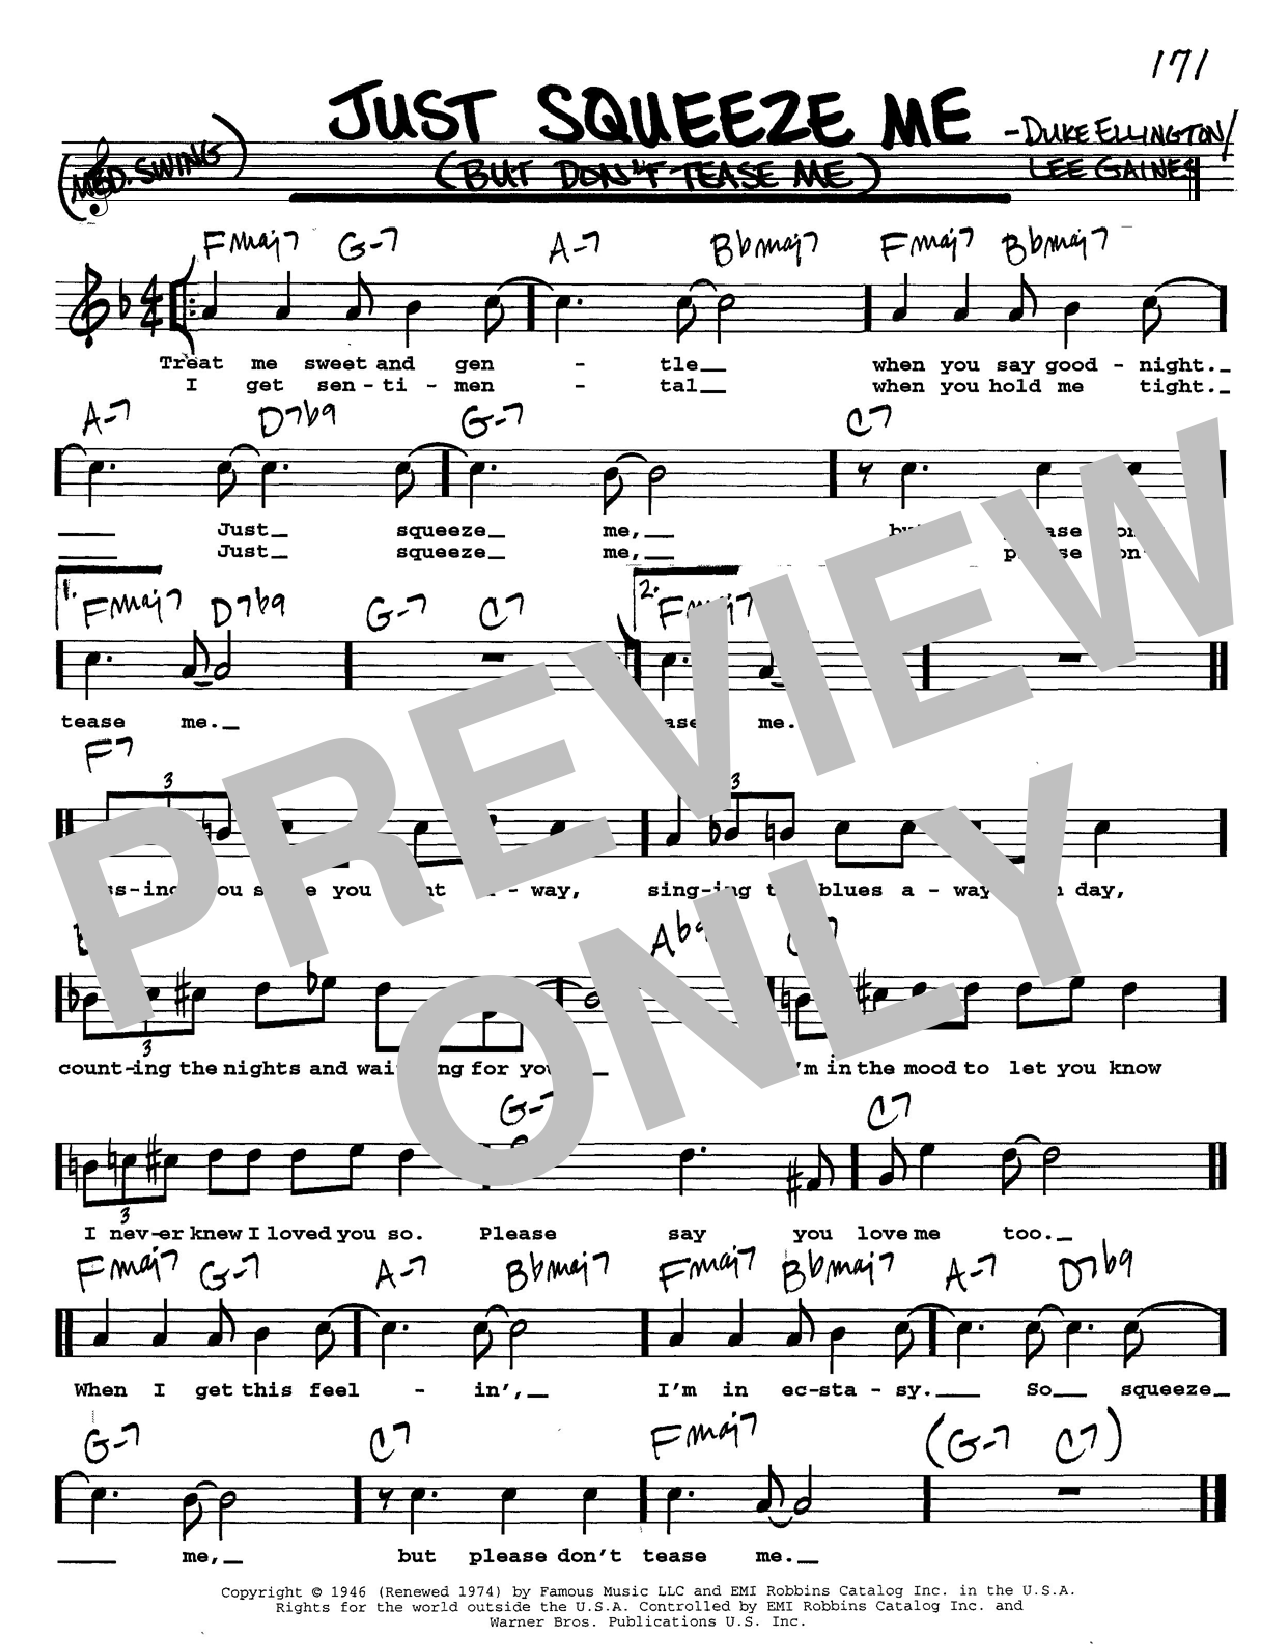 Duke Ellington Just Squeeze Me (But Don't Tease Me) sheet music notes and chords. Download Printable PDF.